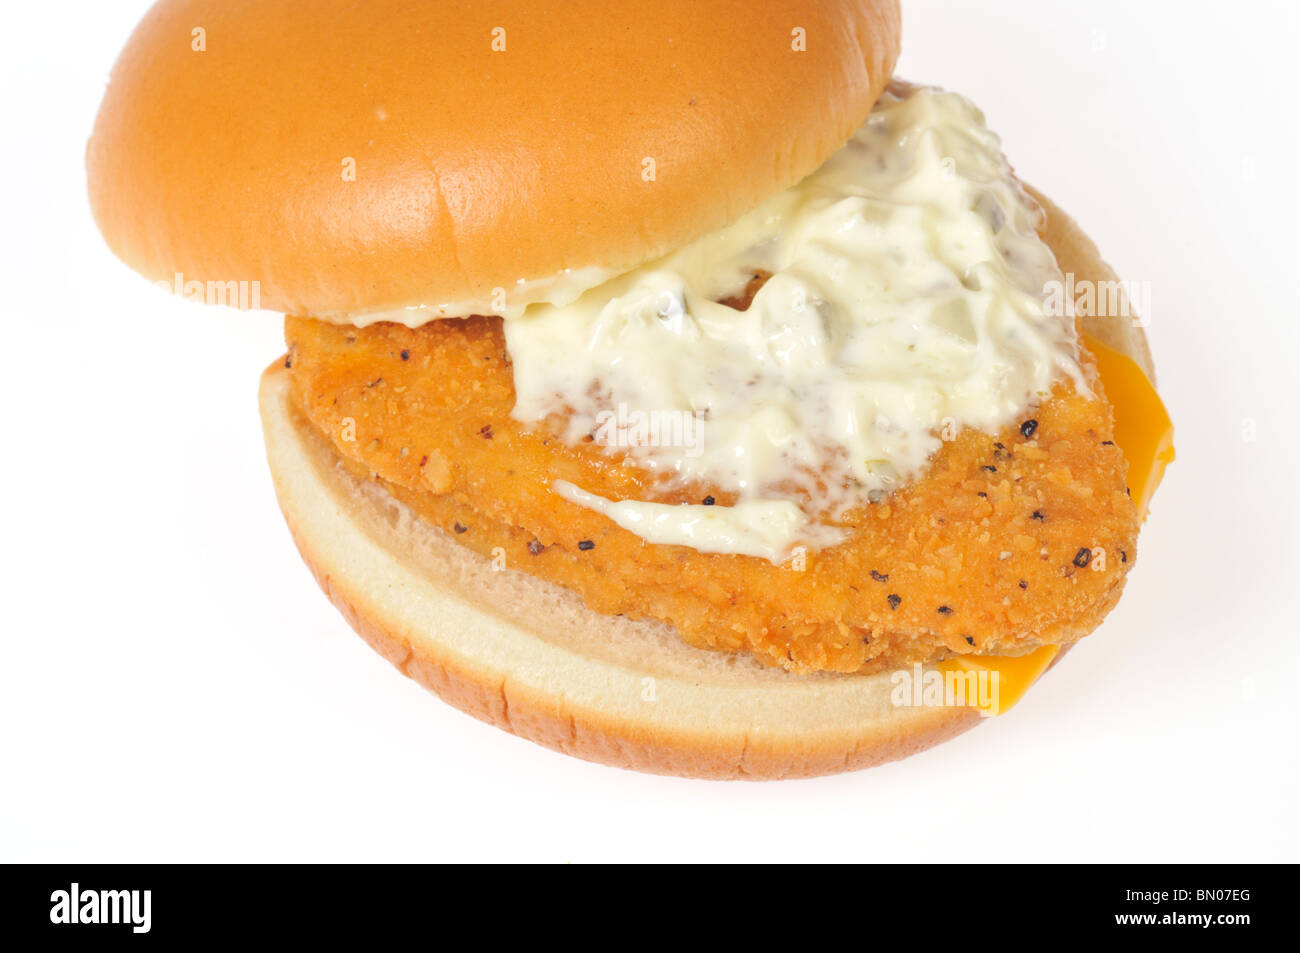 Filet of Fish Sandwich with tartar sauce and cheese on an open bun on a white background cut out. Stock Photo